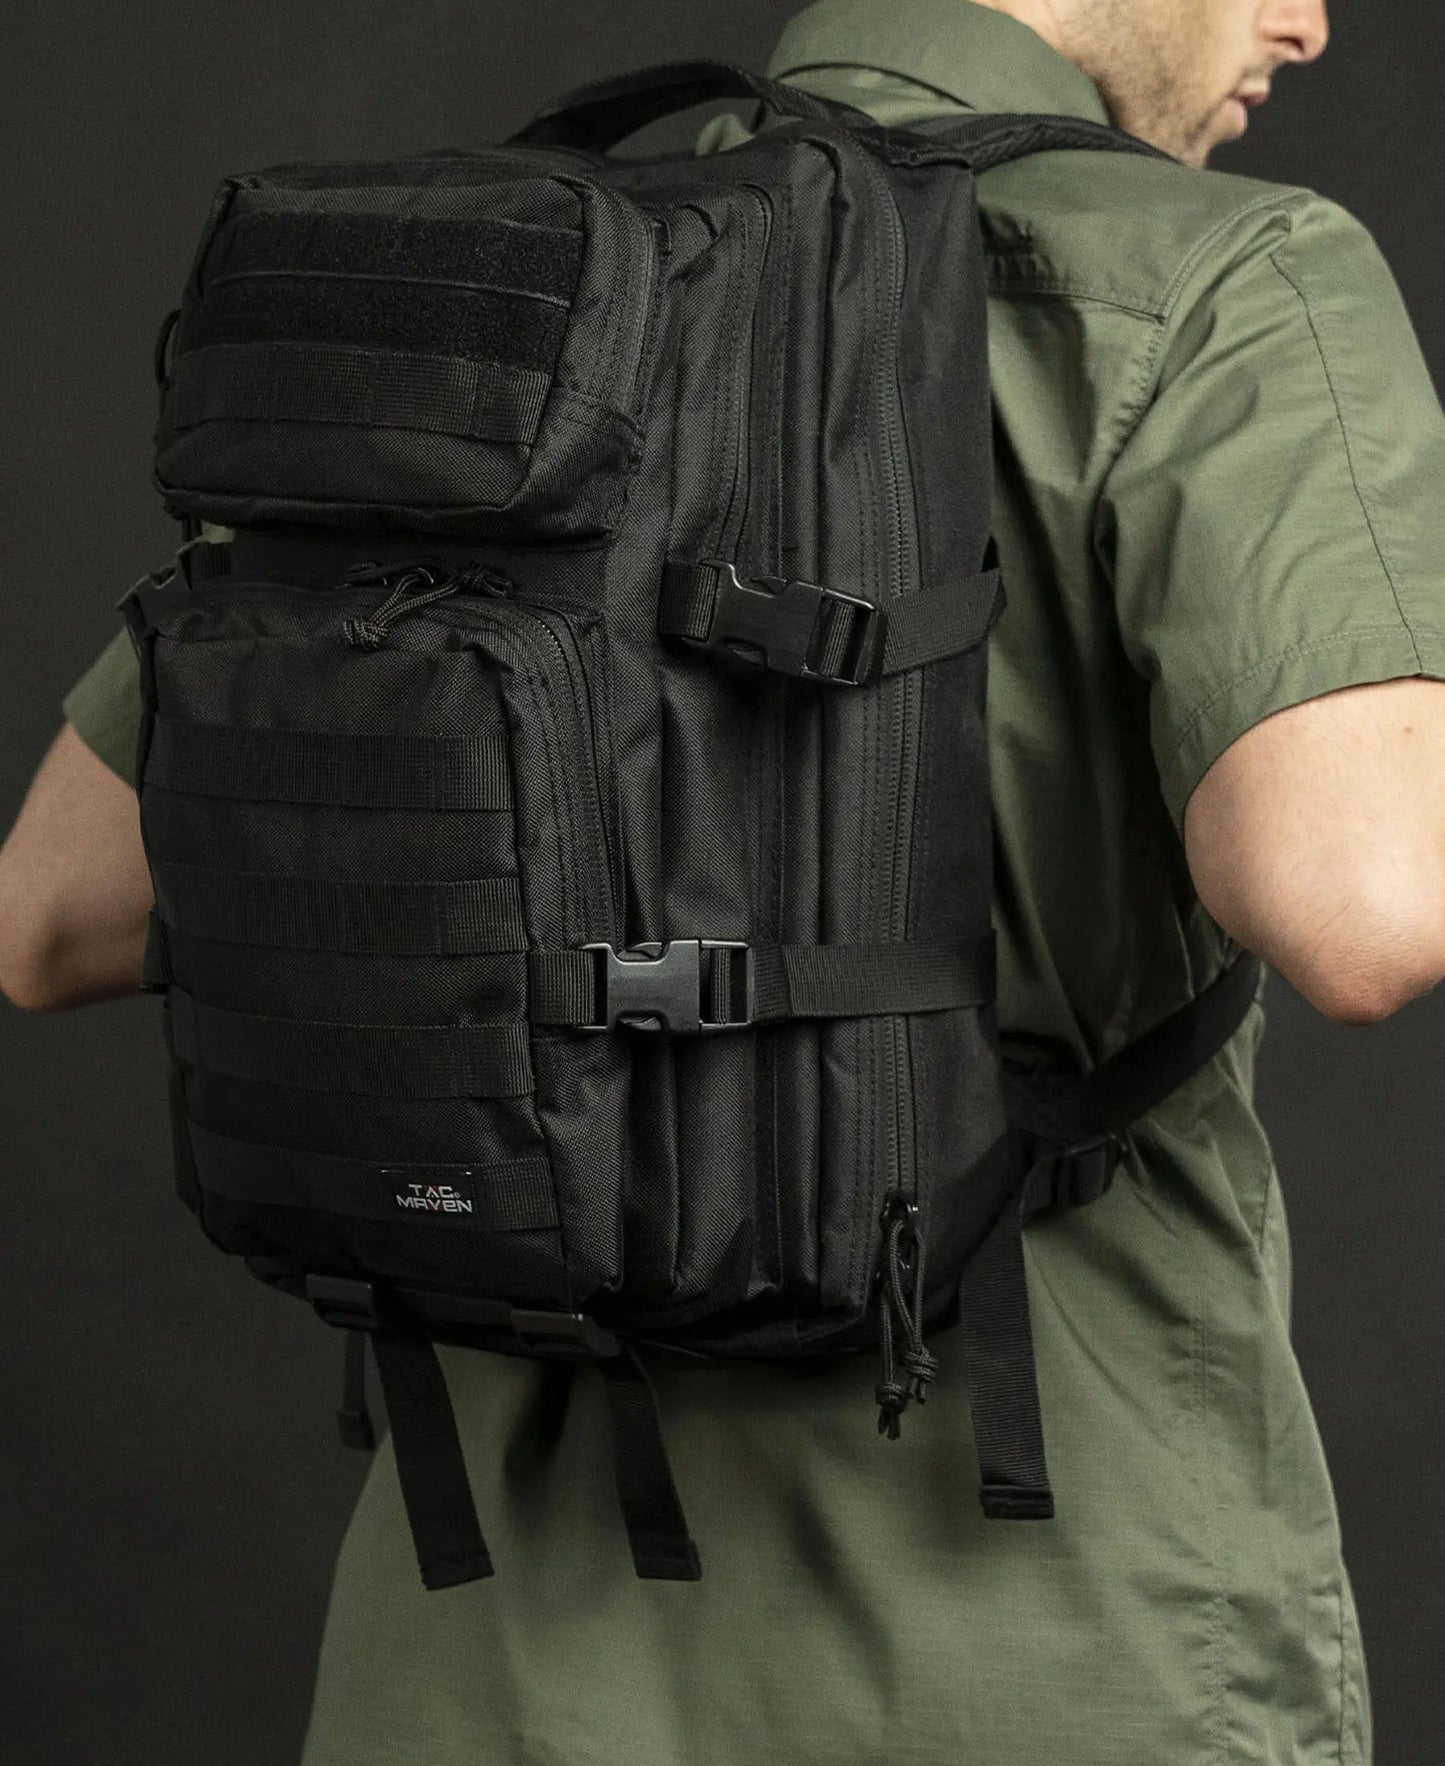 Assault Small Backpack NSO Gear Backpack